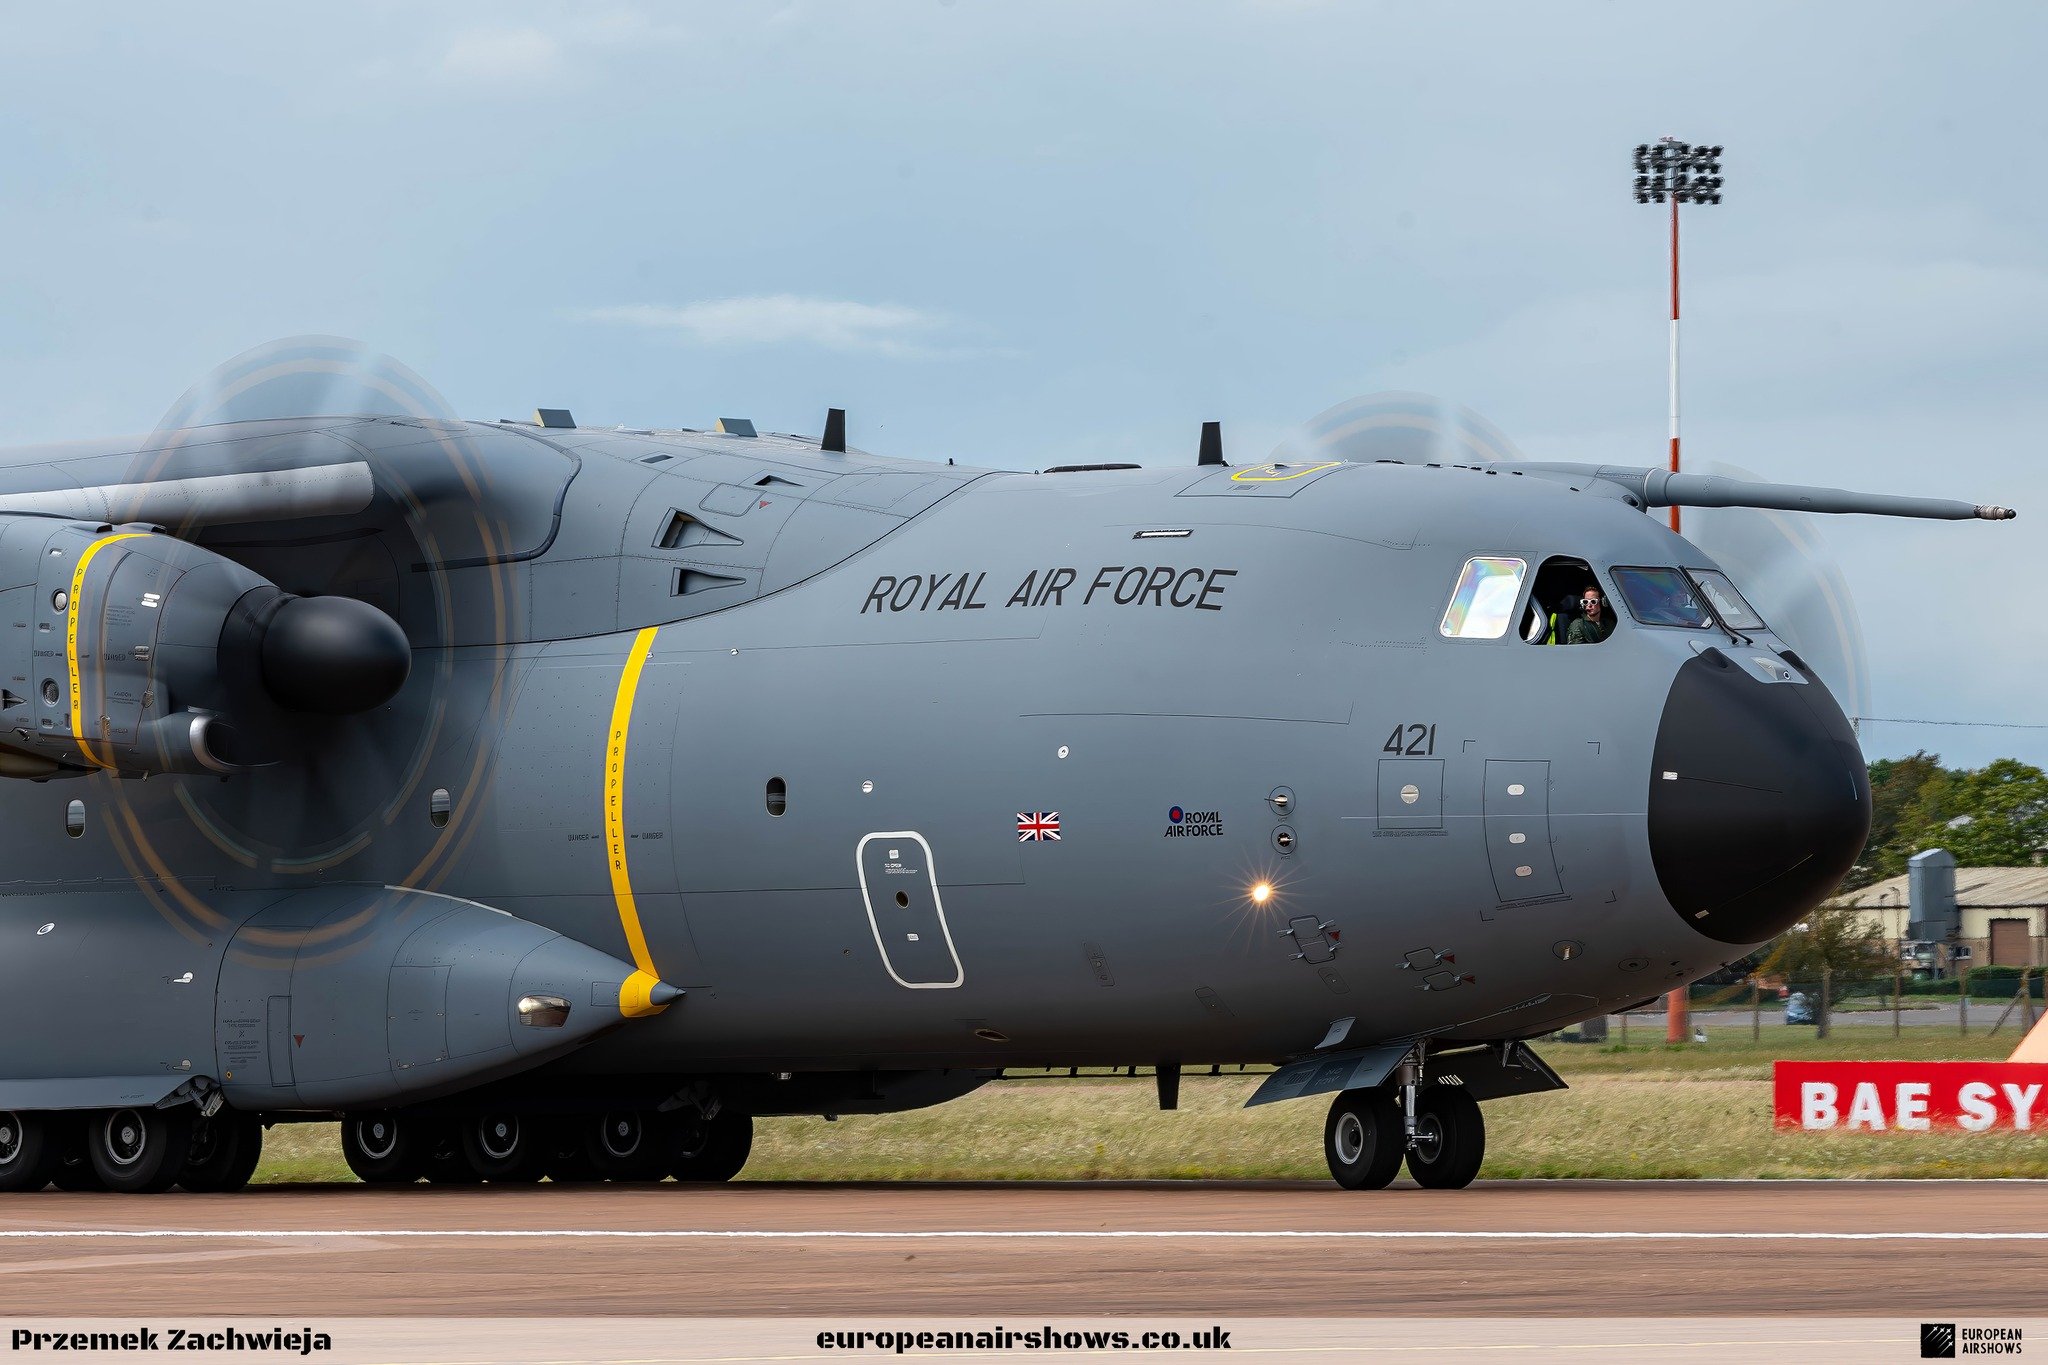 𝐀𝐈𝐑𝐒𝐇𝐎𝐖 𝐍𝐄𝐖𝐒: The @royalairforceuk @airbus A400M Atlas will be serving as the jump platform for the @raffalcons at the @balticairshow. Moreover, the aircraft will also be available for static display during the event.

The Atlas measures o